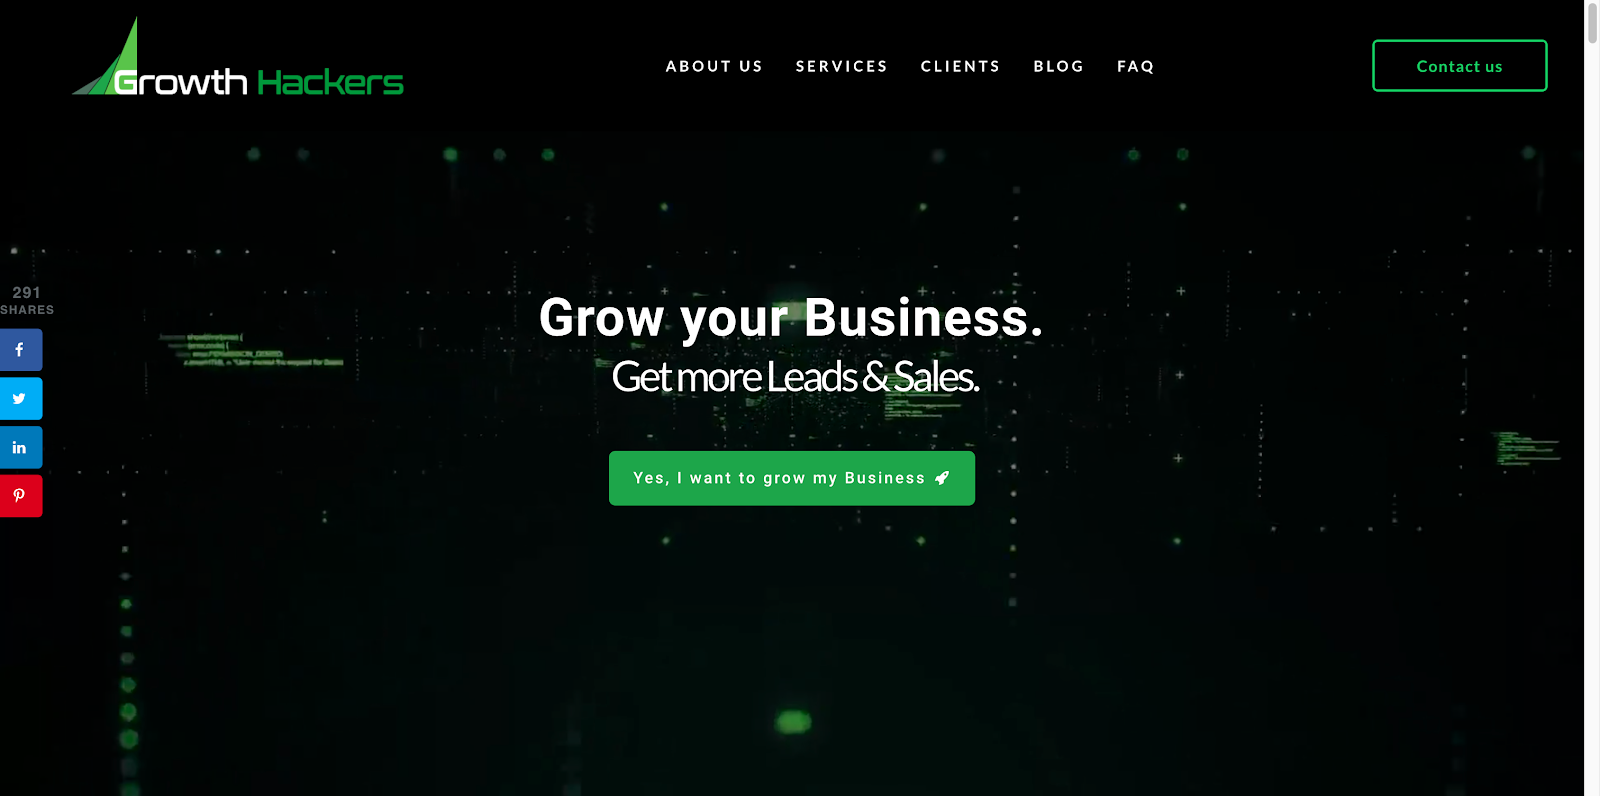 growth hacker website home page